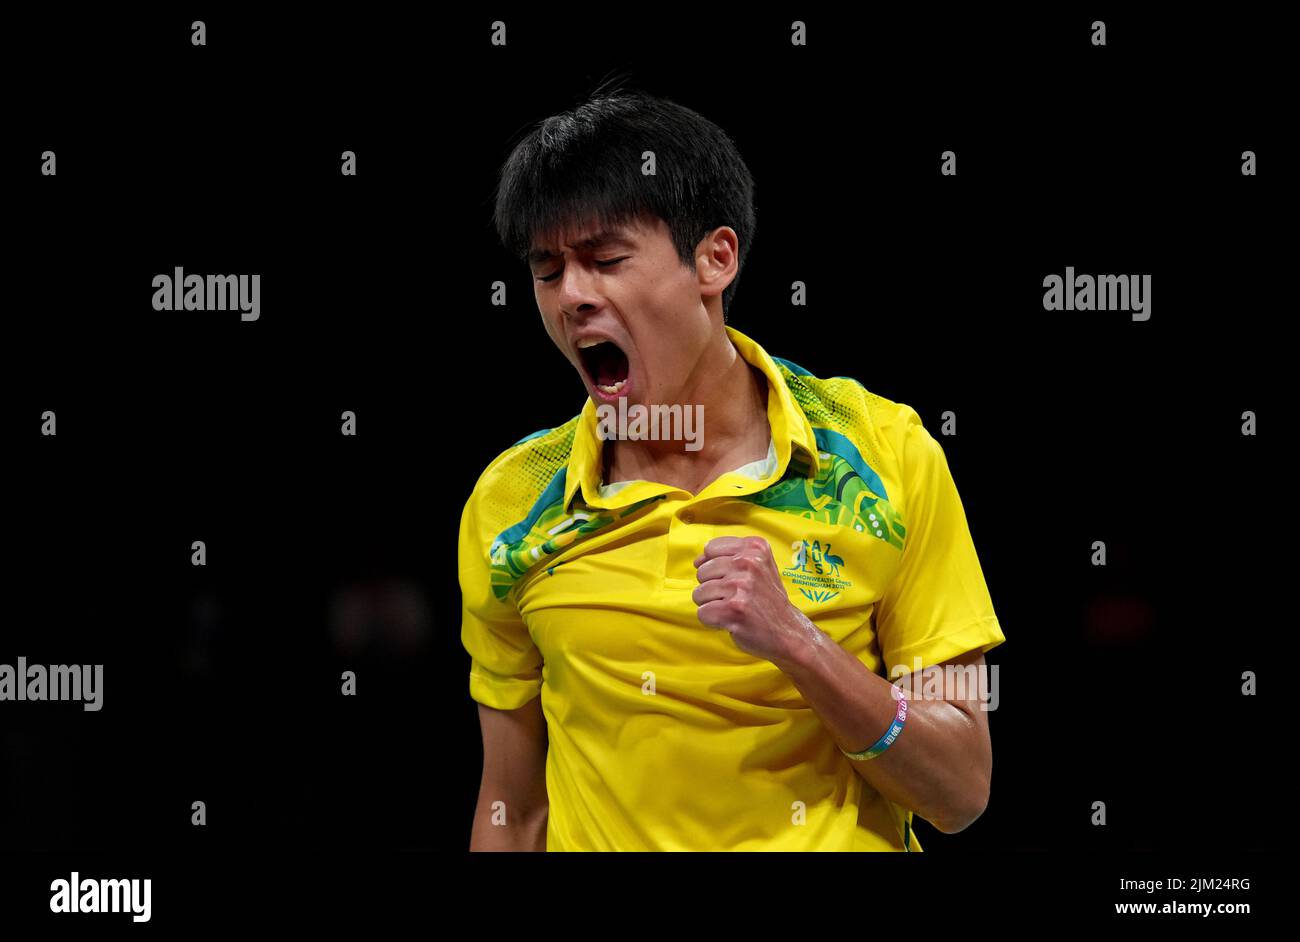 Australia's Nathan Tang celebrates a point during his match against England's Toby Penty at The NEC on day seven of the 2022 Commonwealth Games in Birmingham. Picture date: Thursday August 4, 2022. Stock Photo